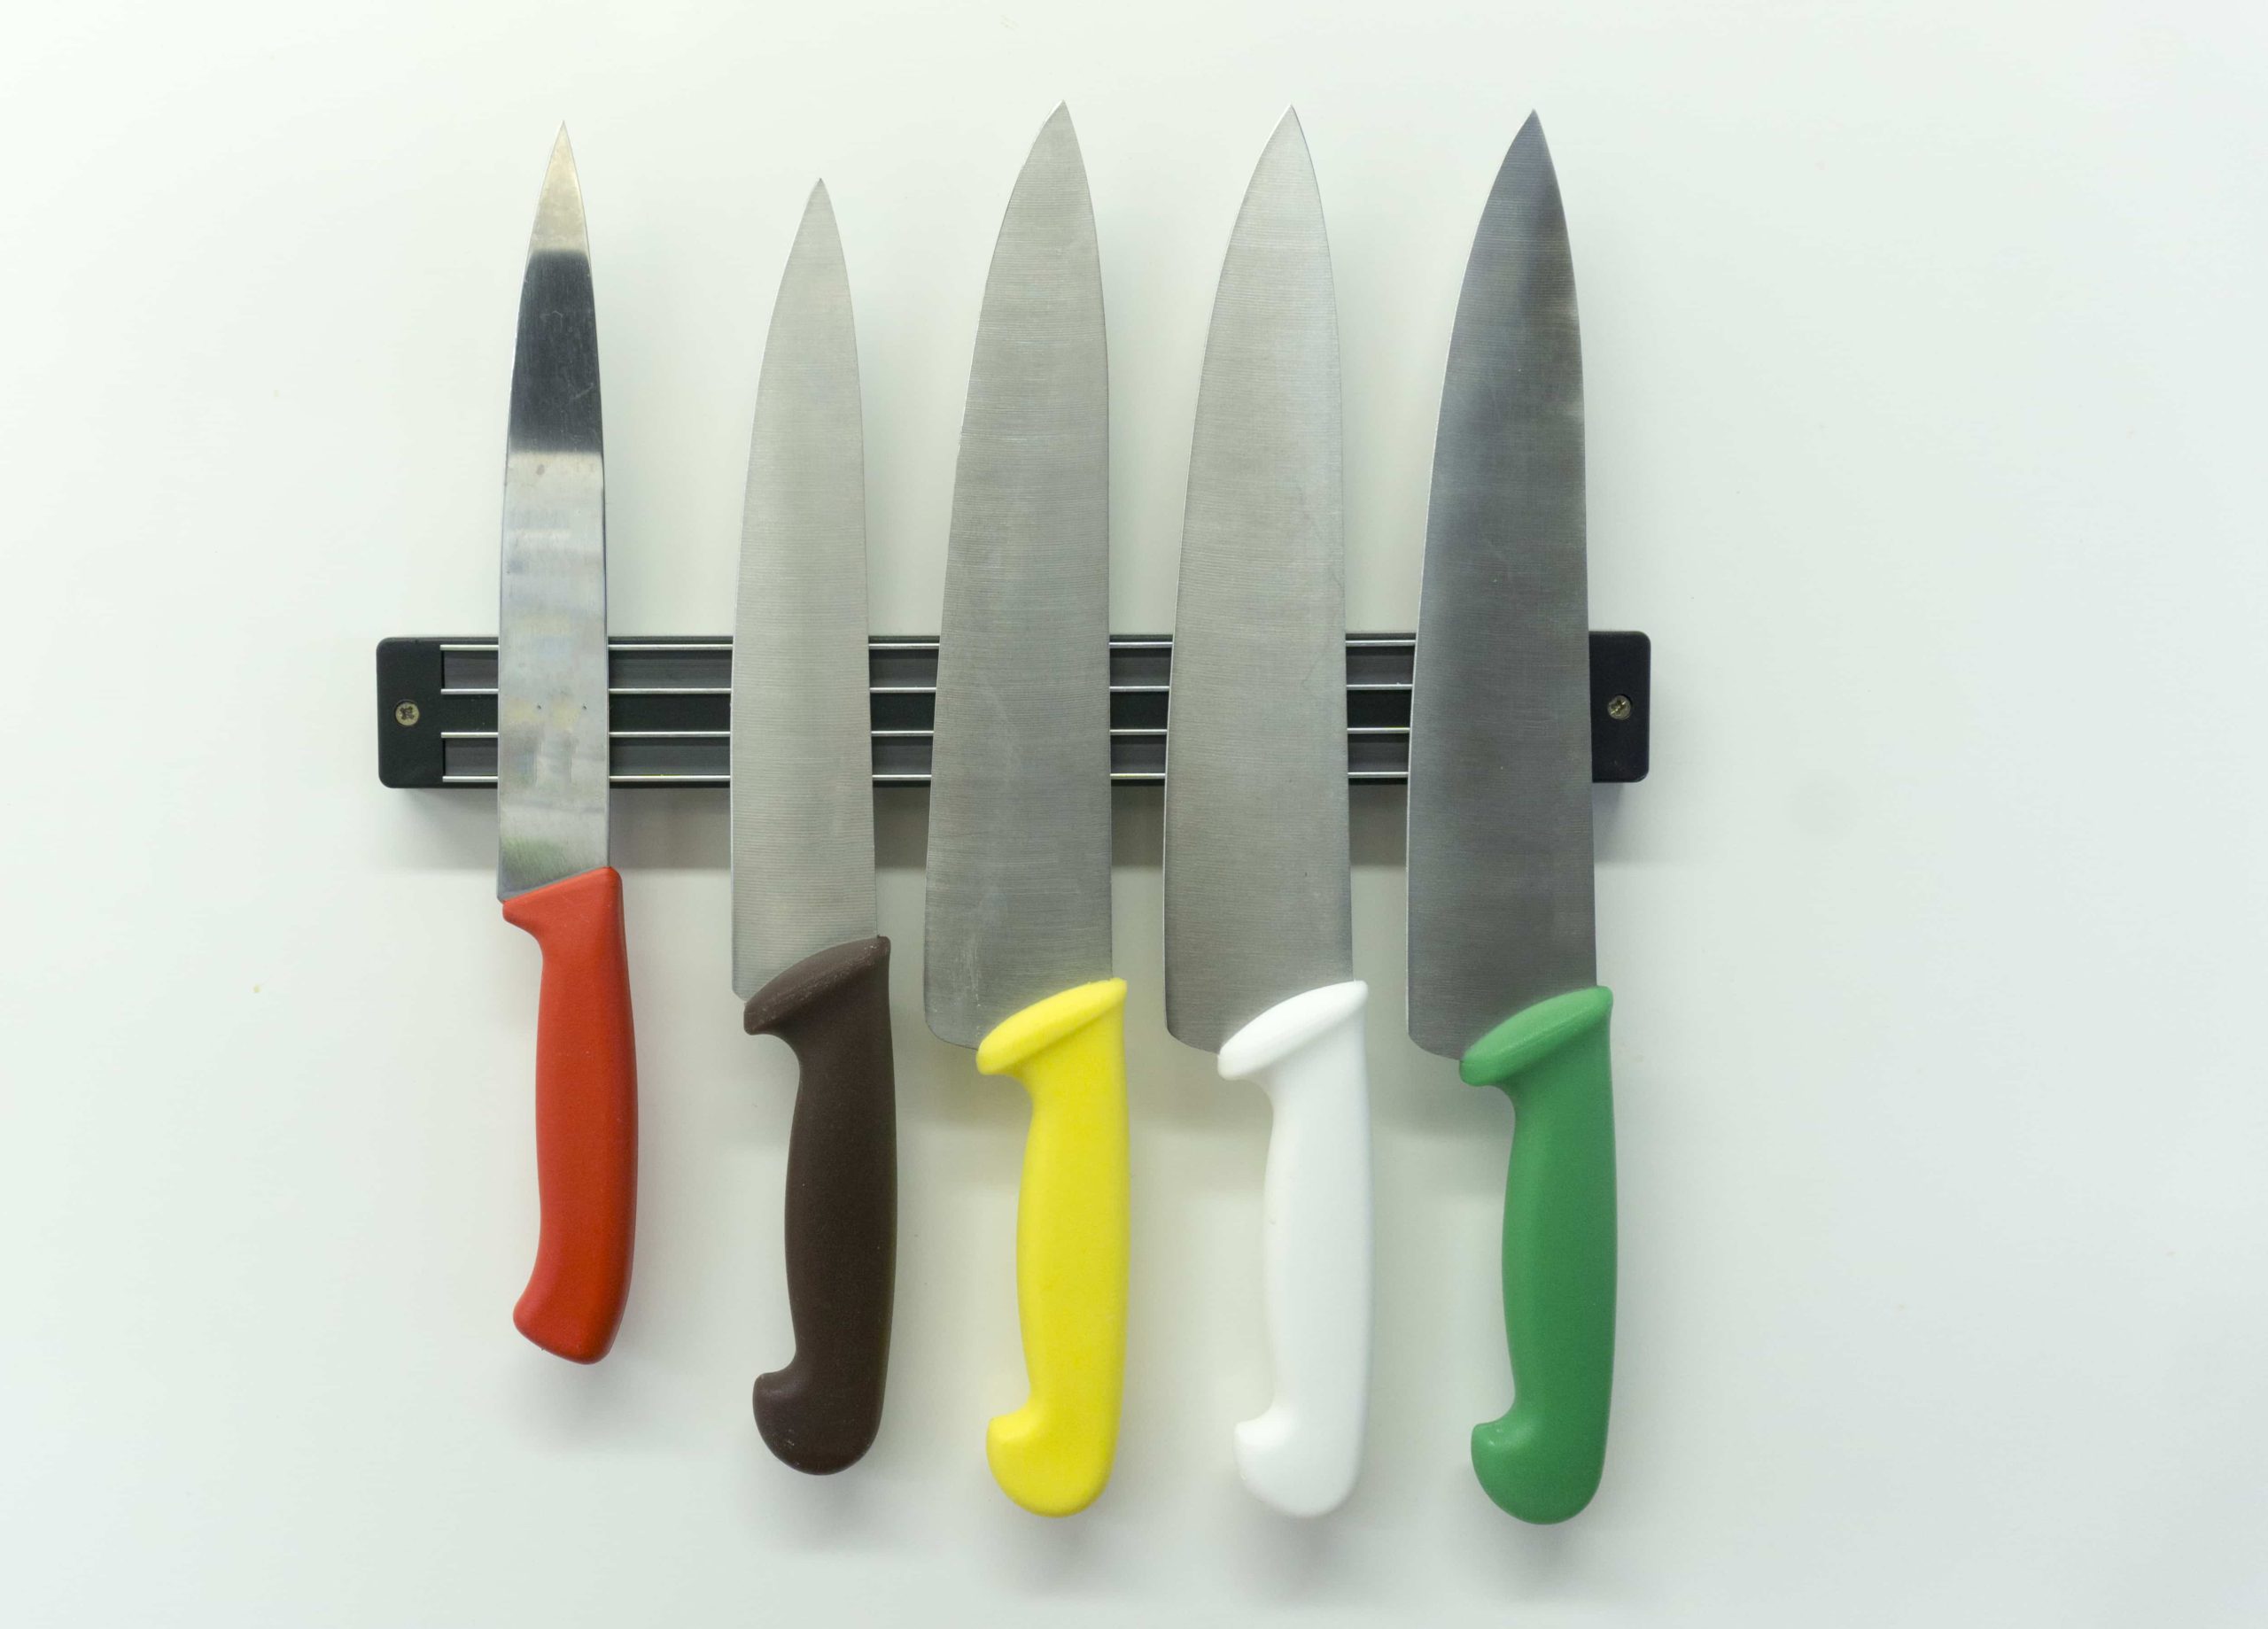 Colour-coded knives